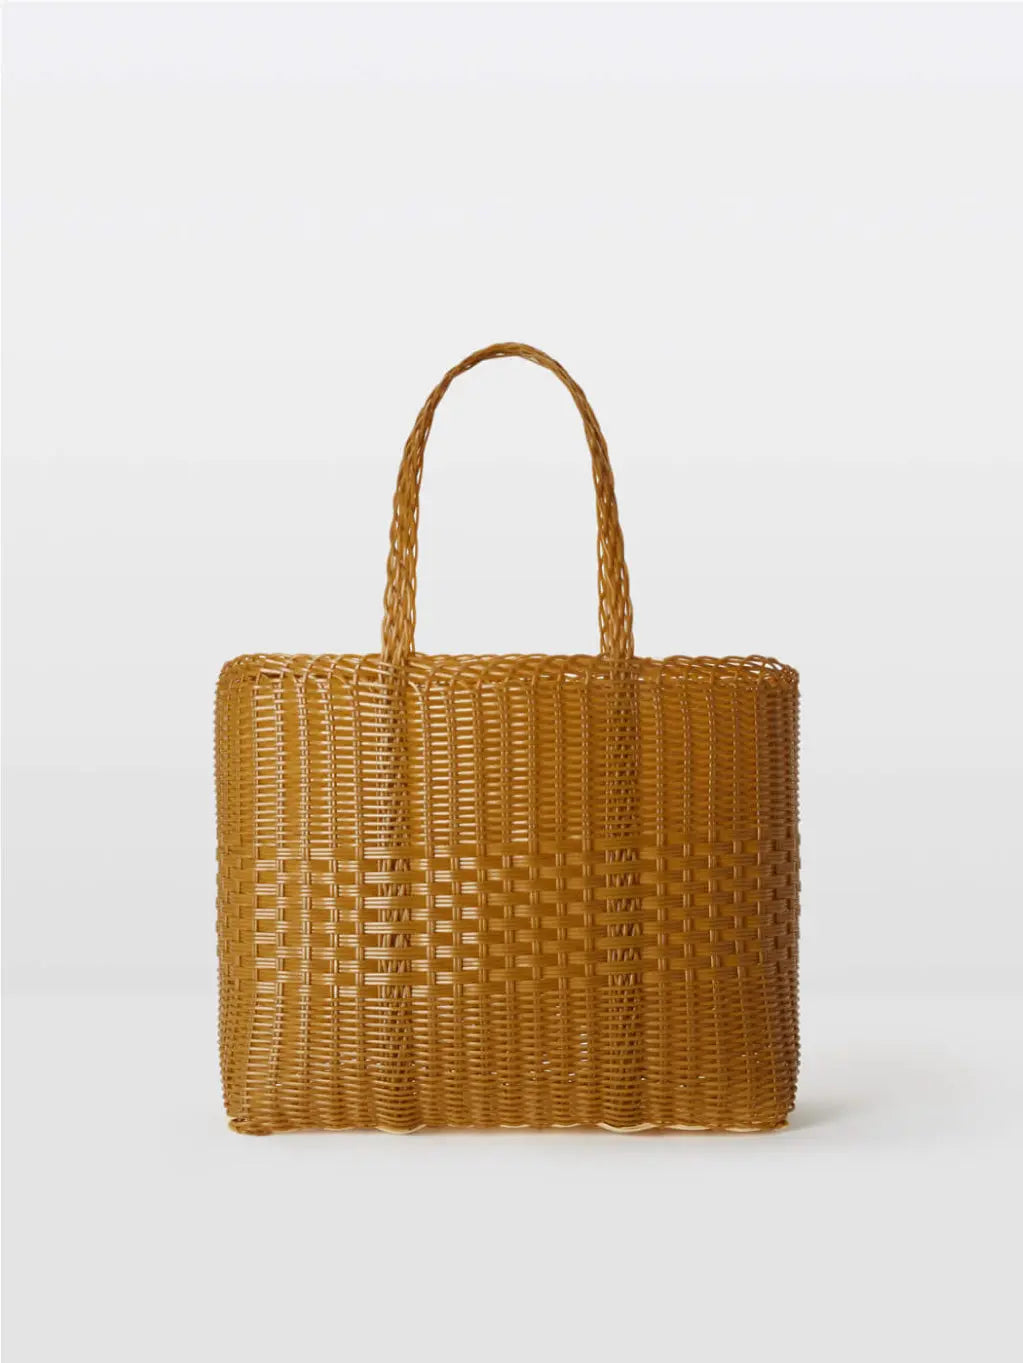 A tan woven straw tote bag, Lace Small Bag Tobacco by Palorosa, with a rectangular shape and two matching handles, available at bassalstore. The bag features an open, airy weave design and is displayed on a simple white background.